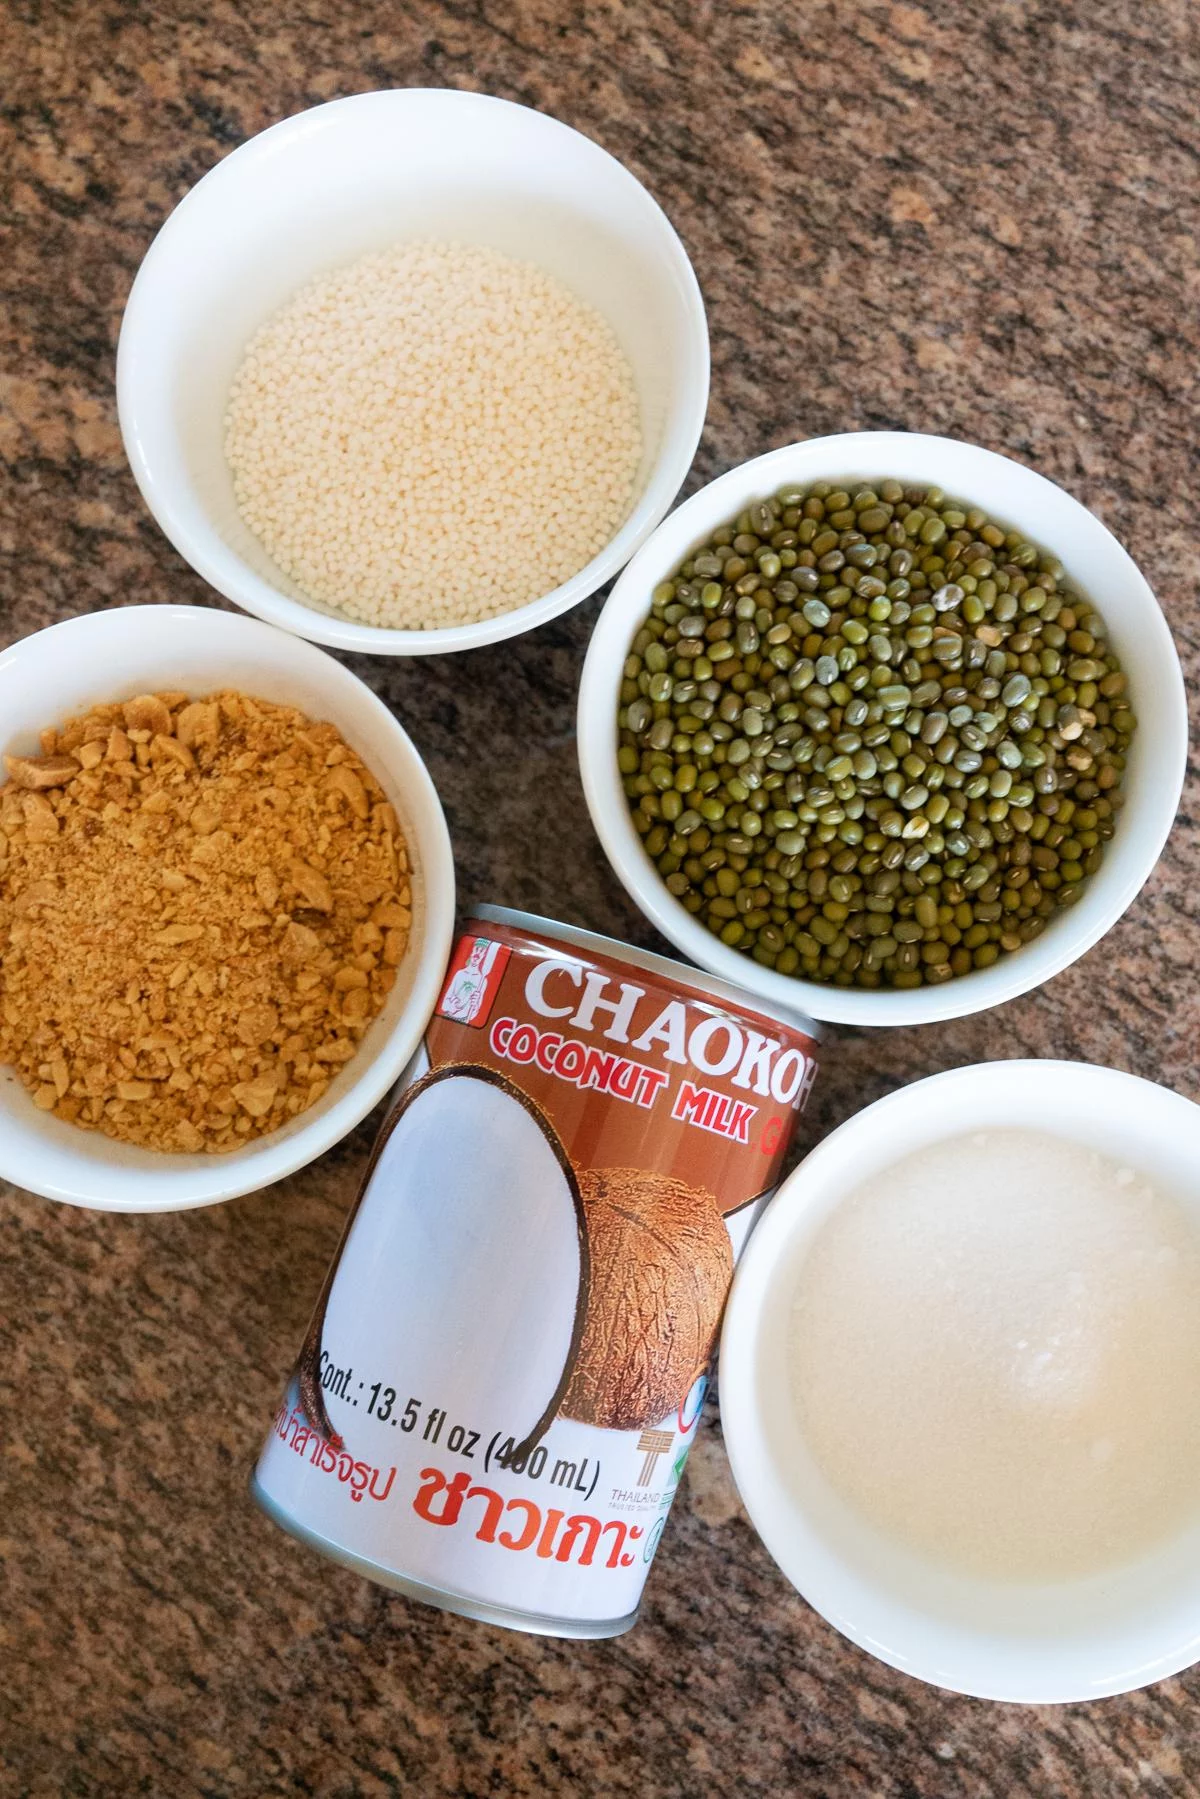 Ingredients for Vietnamese Mung Bean Dessert (Che Dau Xanh): dried green mung beans, coconut milk, small tapioca pearls, sugar, and crushed peanuts